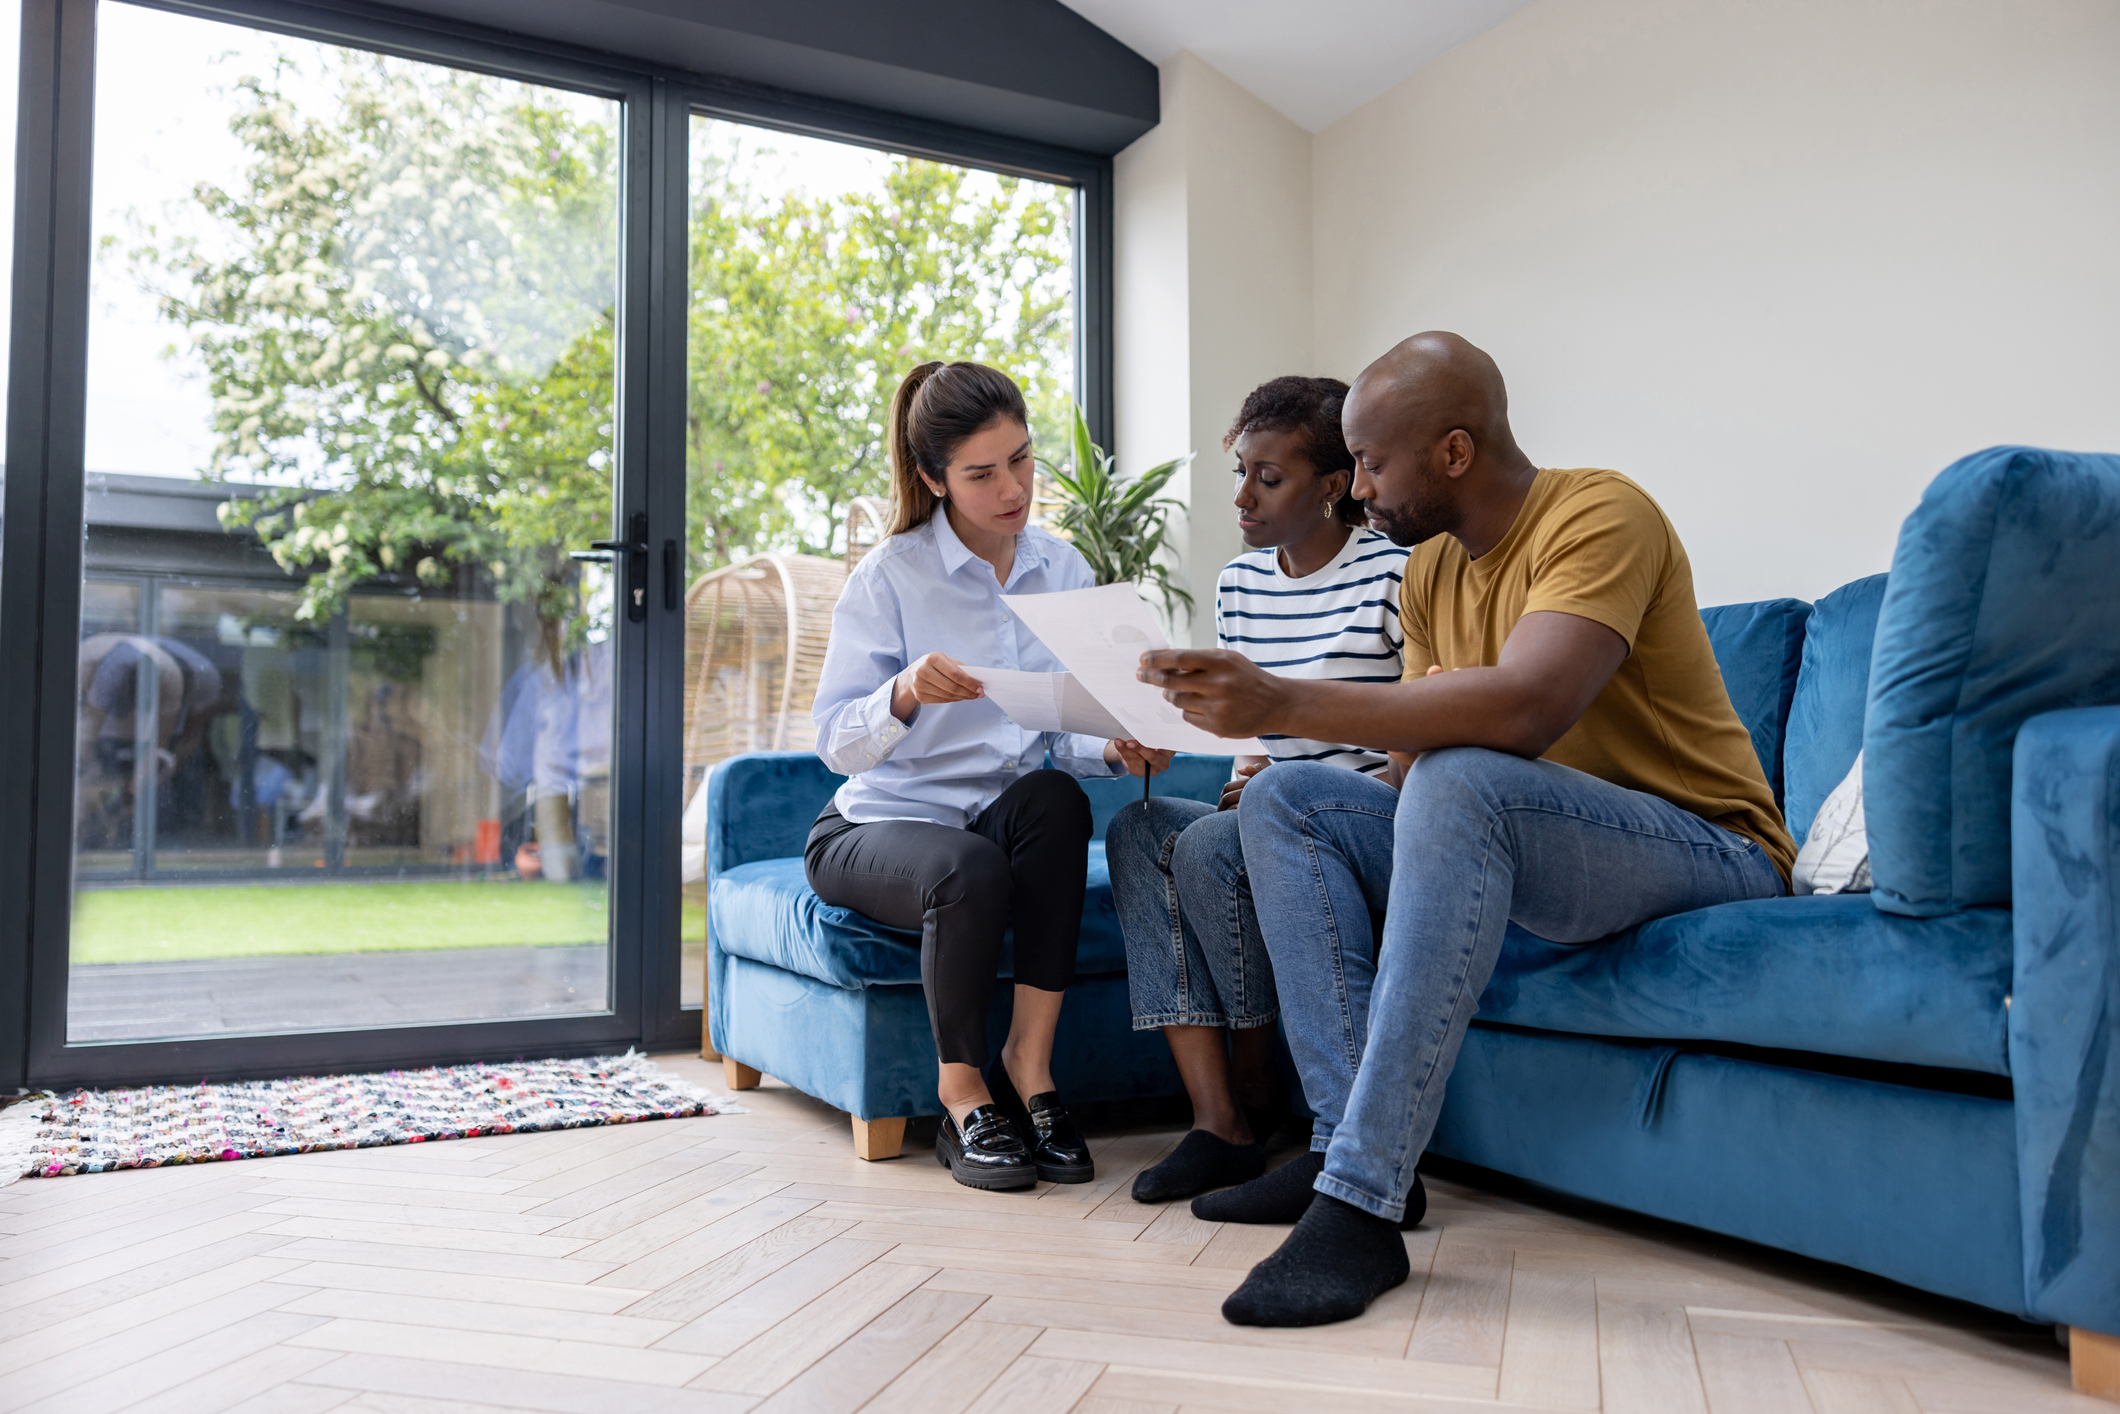 How to Find Good Tenants and Retain Them